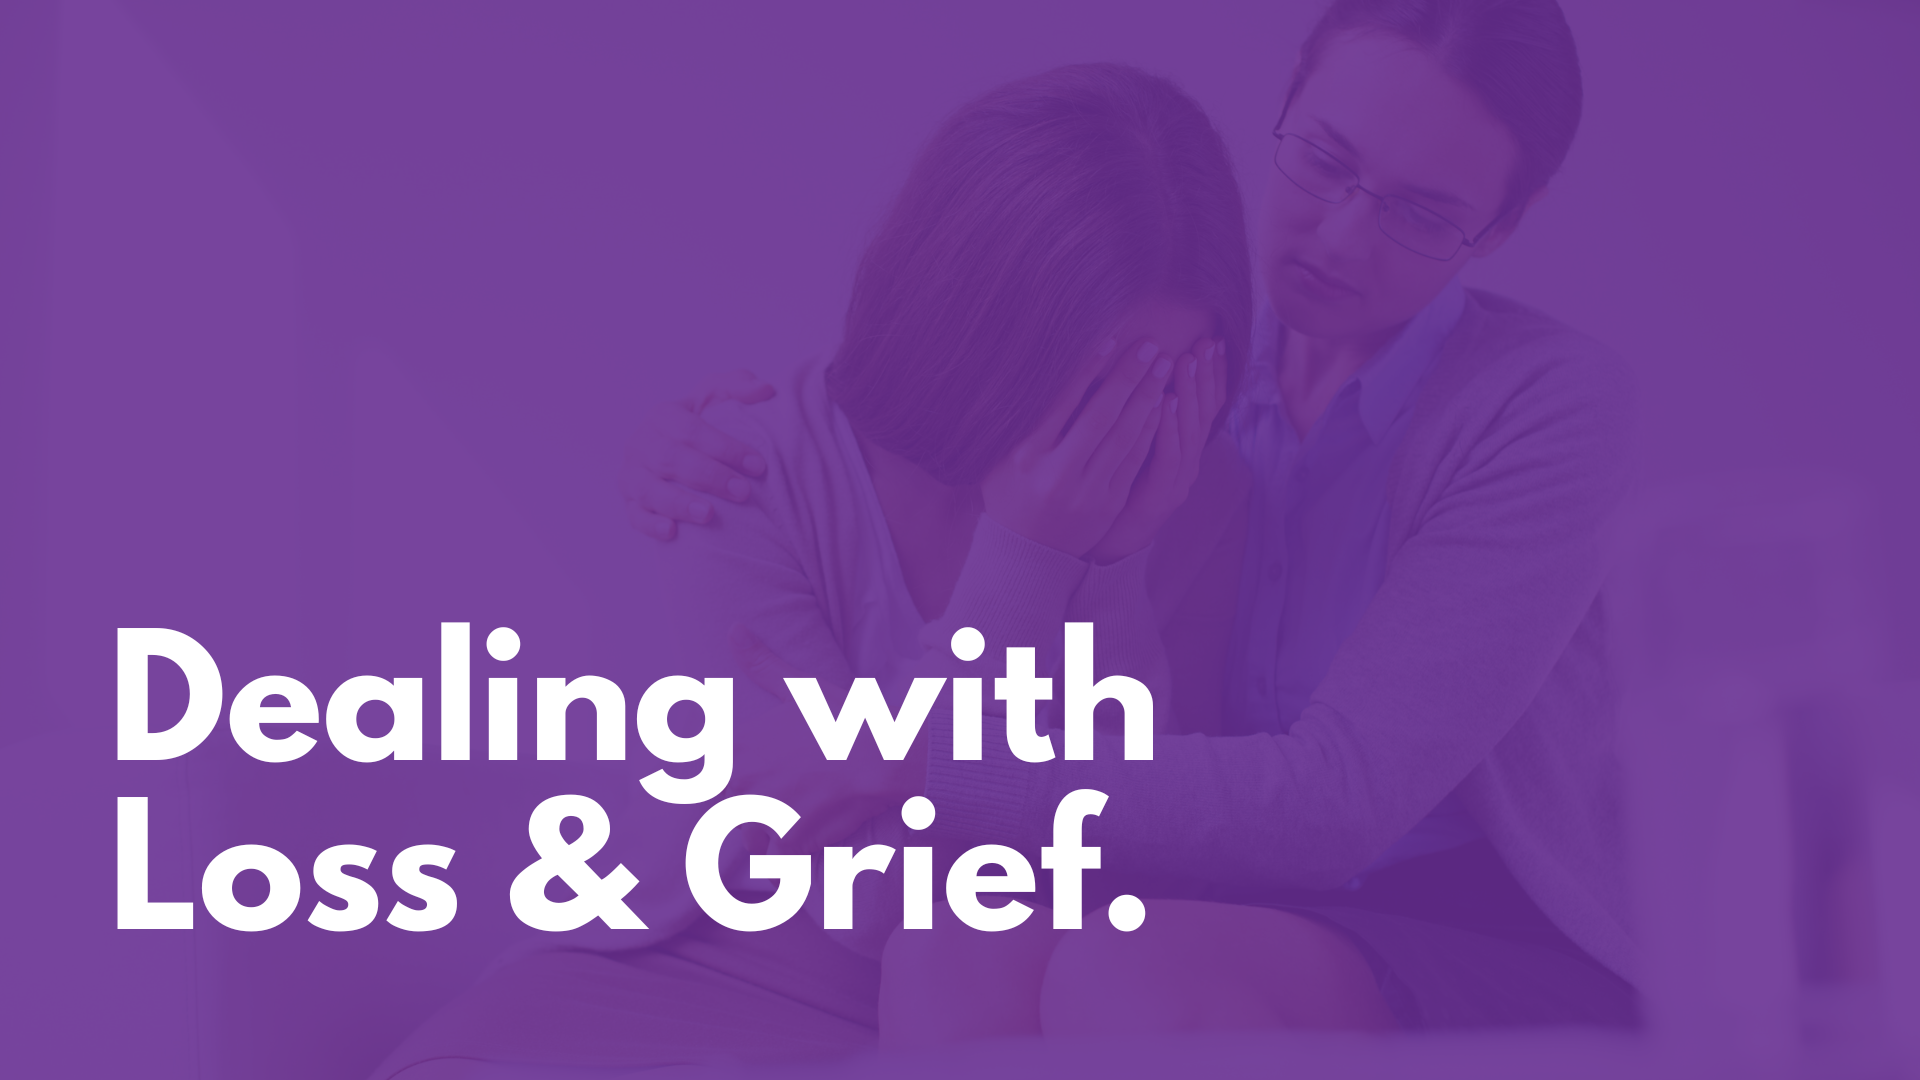 Dealing with Loss & Grief